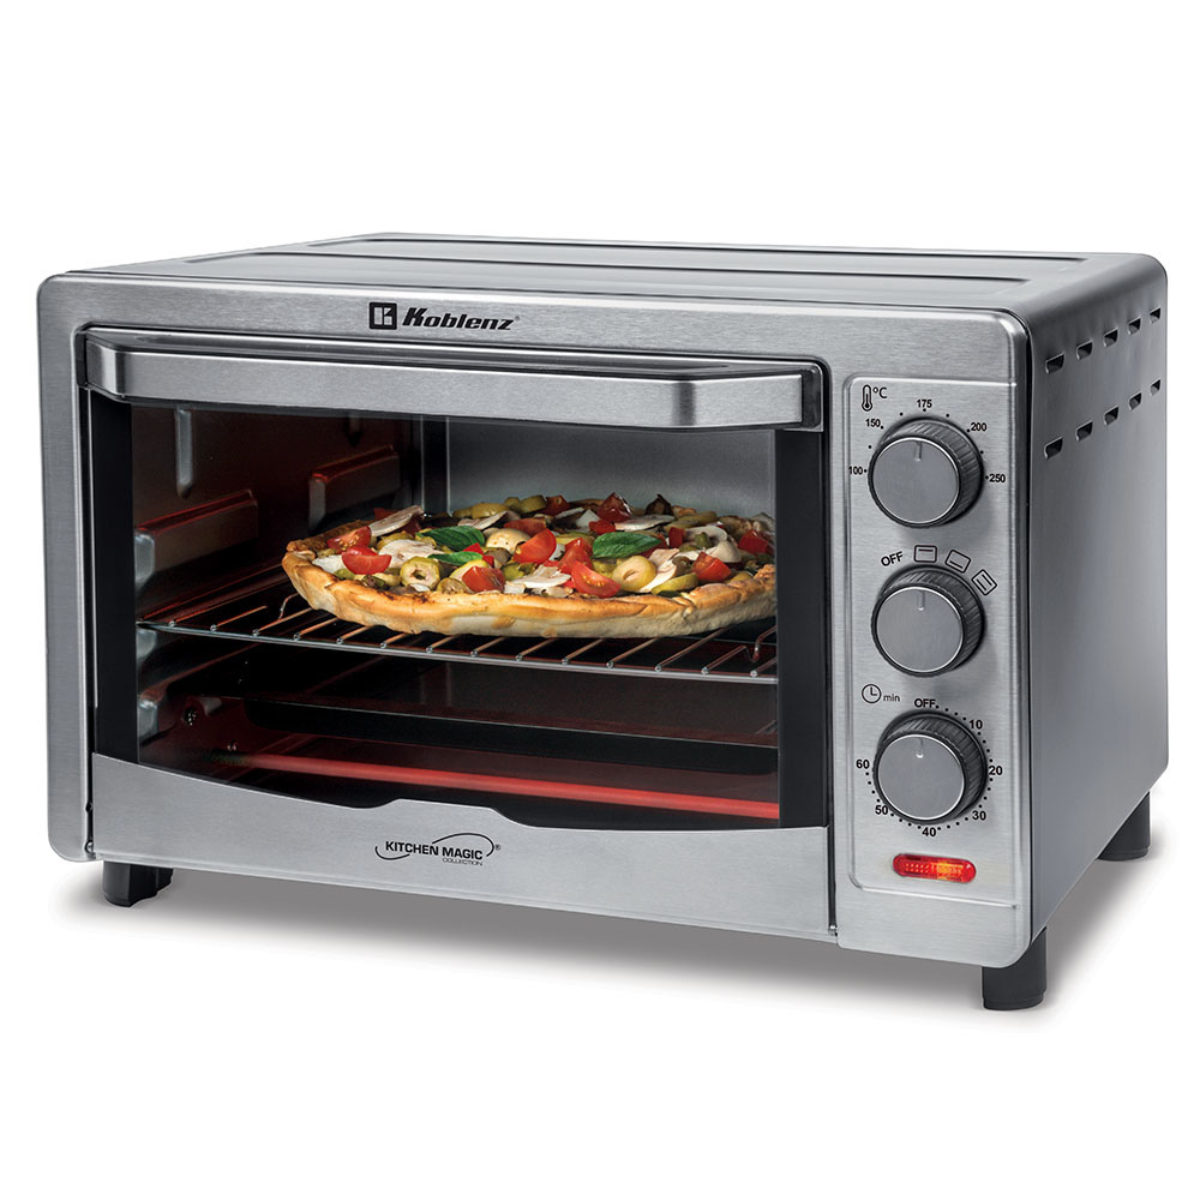 Convection Toaster Oven HKM-1500 C